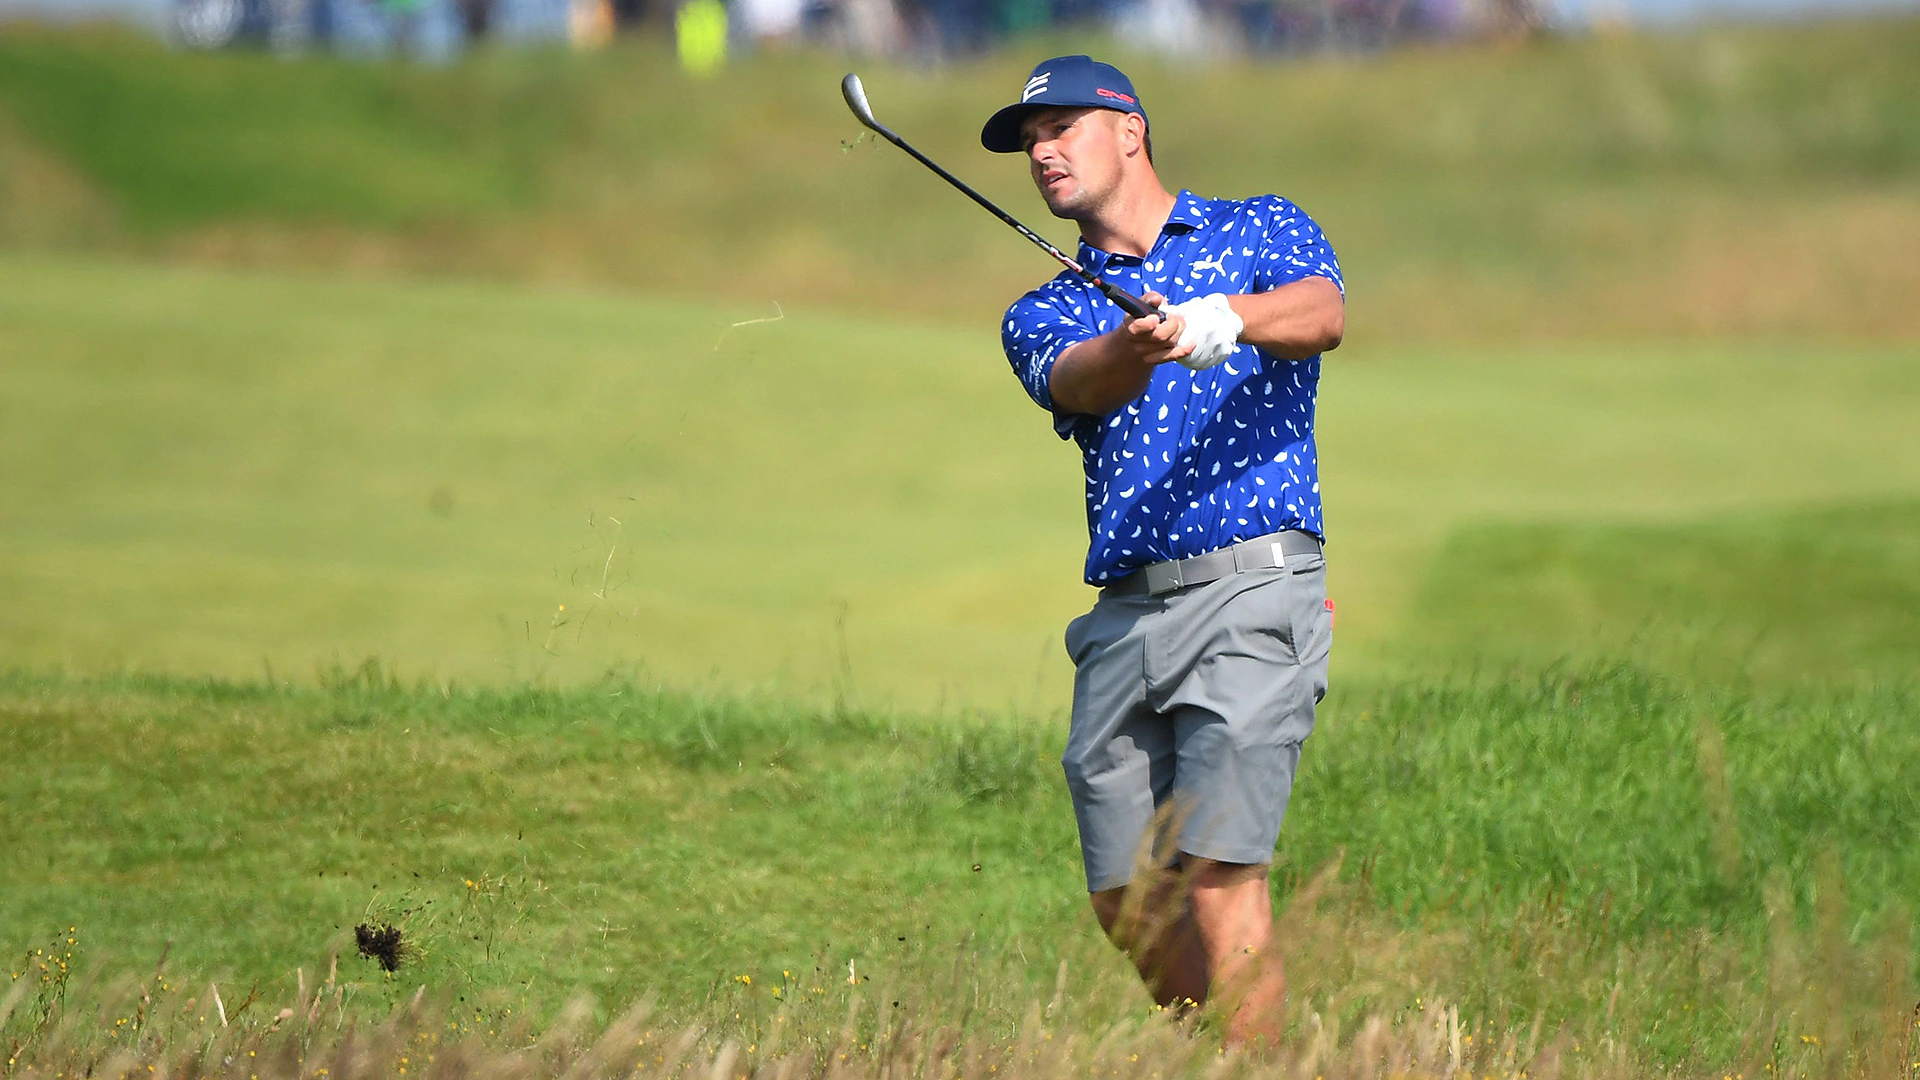 Dialing it back? Bryson DeChambeau says that’s the plan for Royal St. George’s